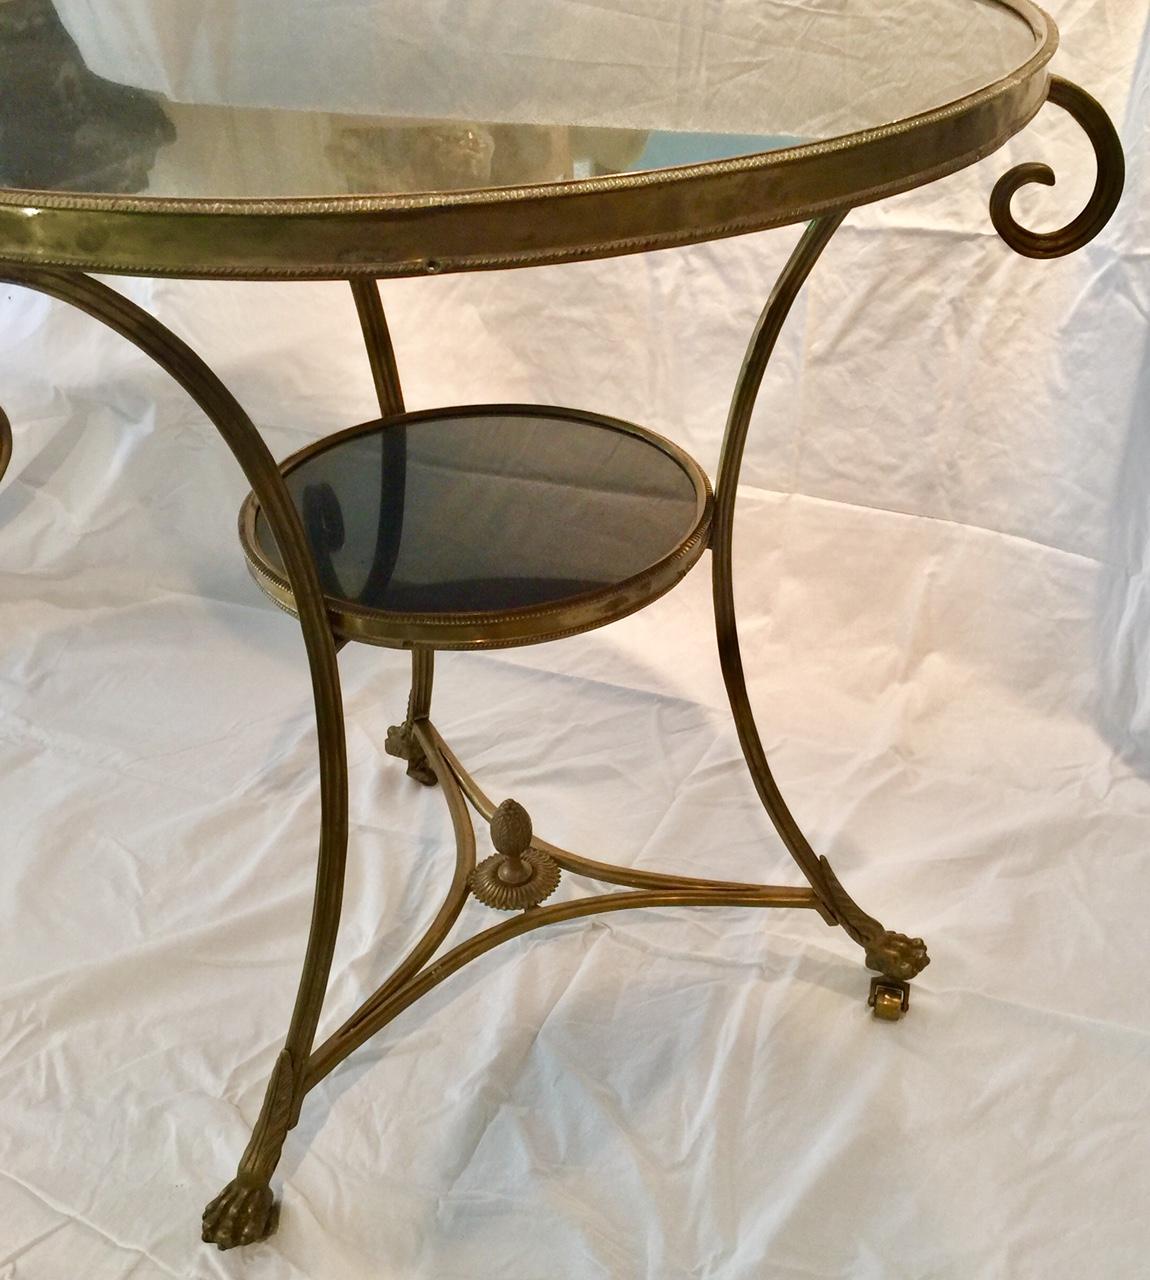 A classic French bronze and black marble two-tiered round gueridon table on scrolled legs with paw feet on castors. A round black marble top is encircled by a decorative bronze band. The legs are joined by an openwork triangular bronze crosspiece,